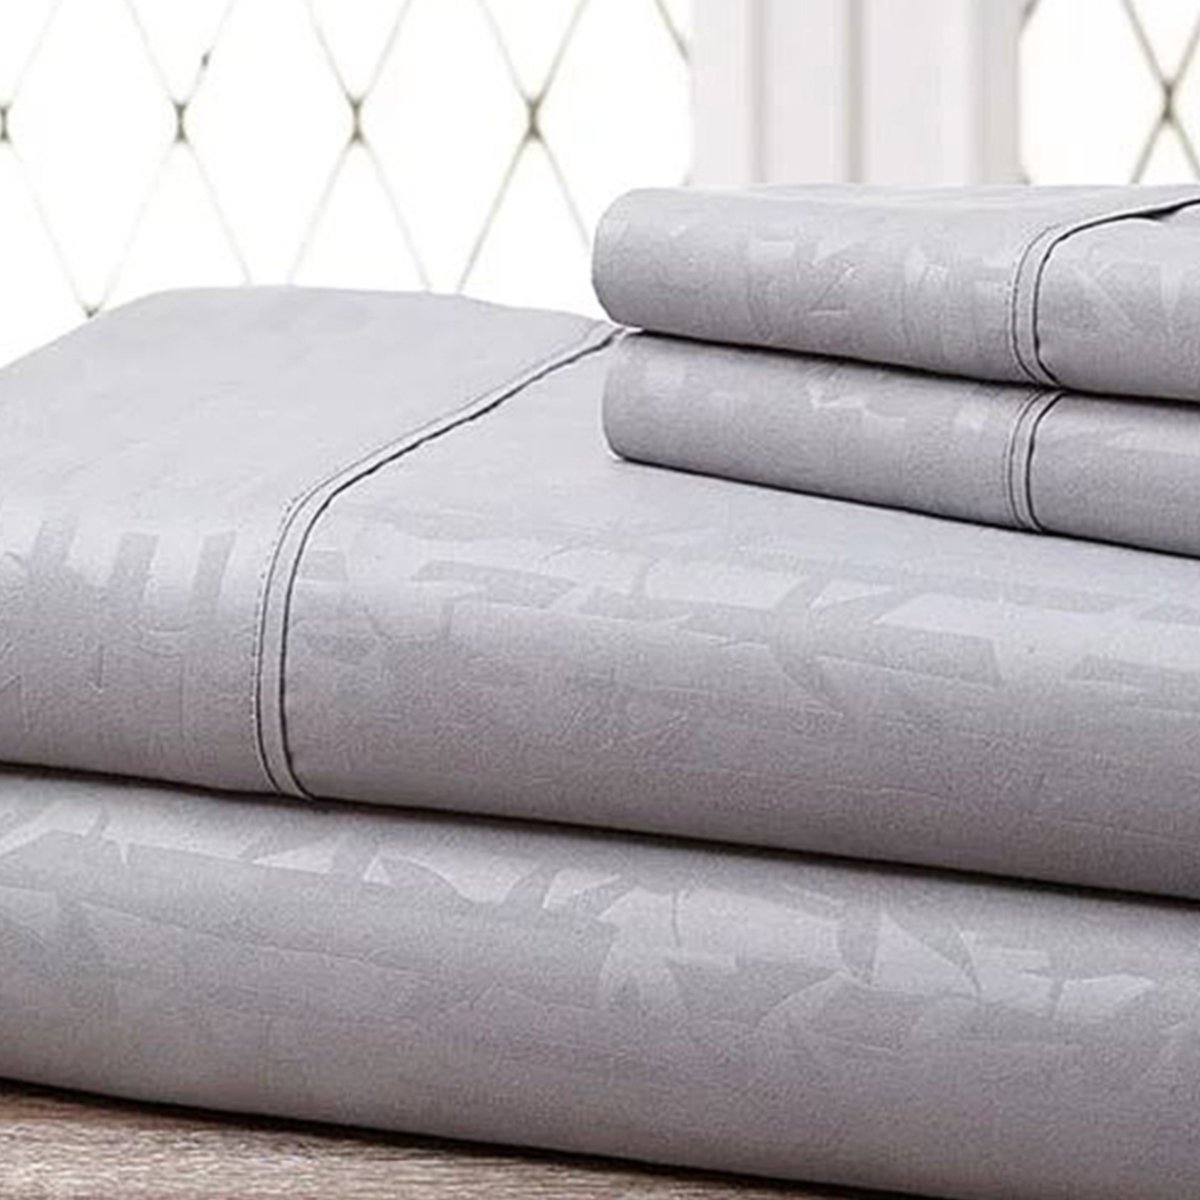 Super-soft 1600 Series Bamboo Embossed Bed Sheet, Gray - Queen, 4 Piece